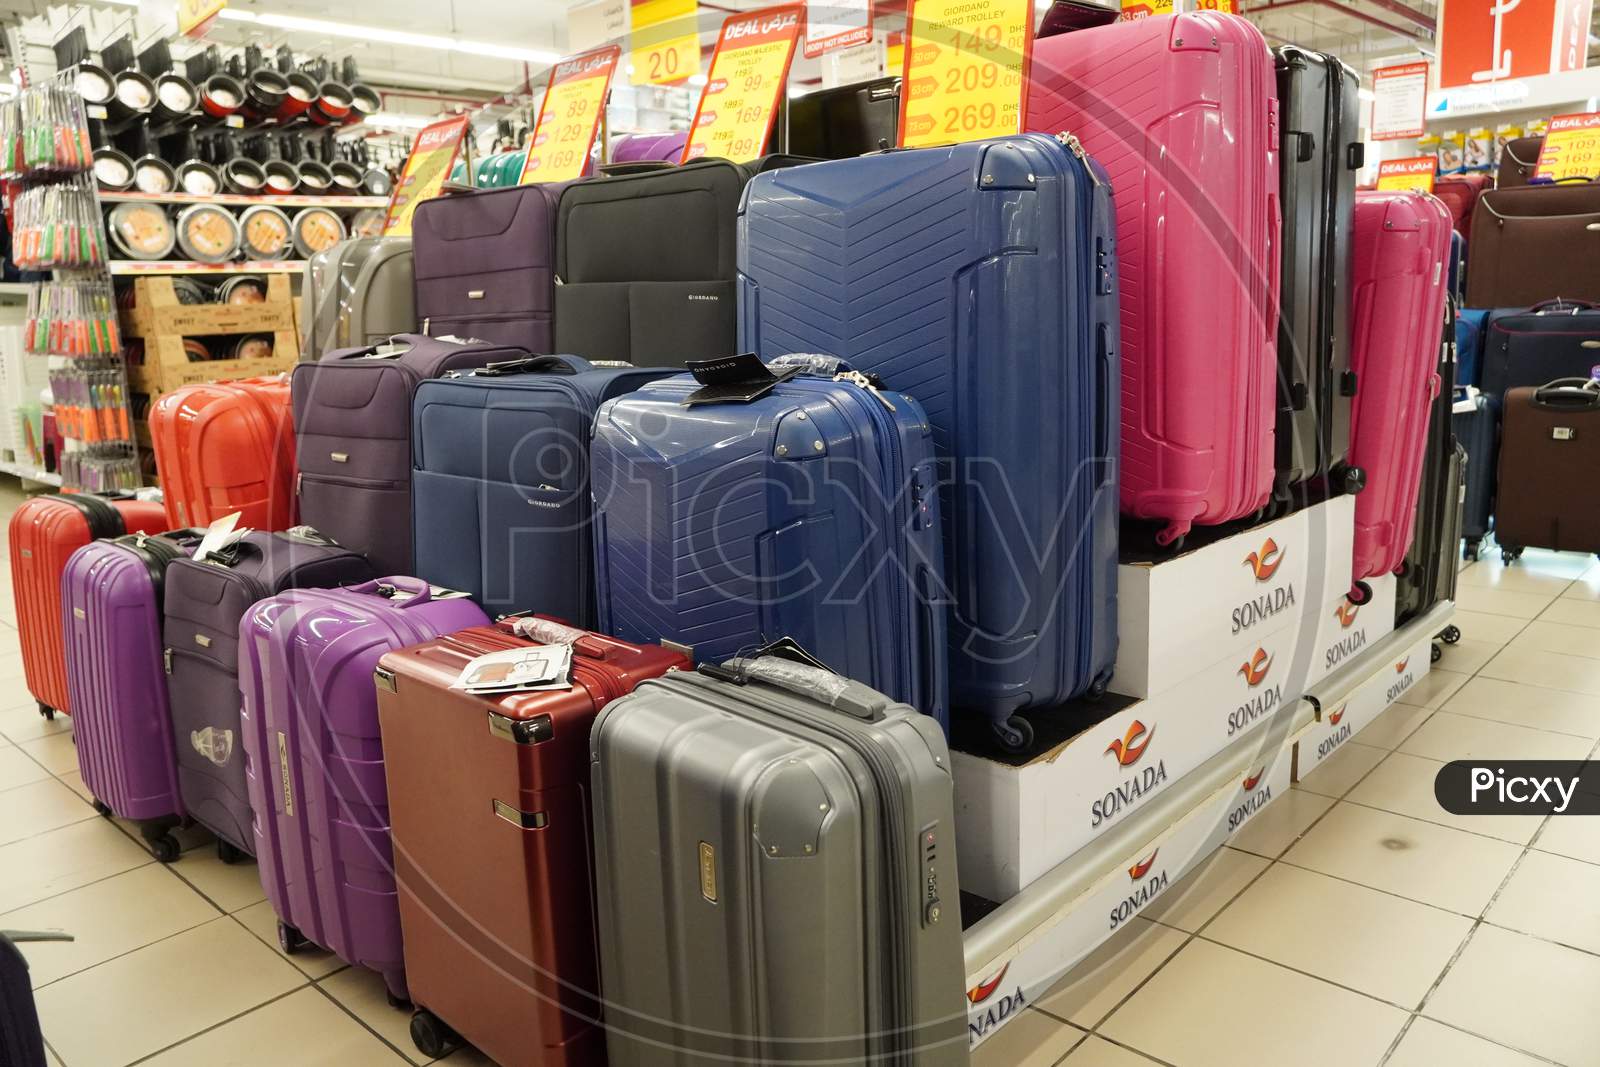 Department Store Interior View With Luggage Zone. Multicolored Suitcases In Store For Sale. Plastic And Cloth Suitcases With Discount Tags. Concept Of Black Friday Discounts India